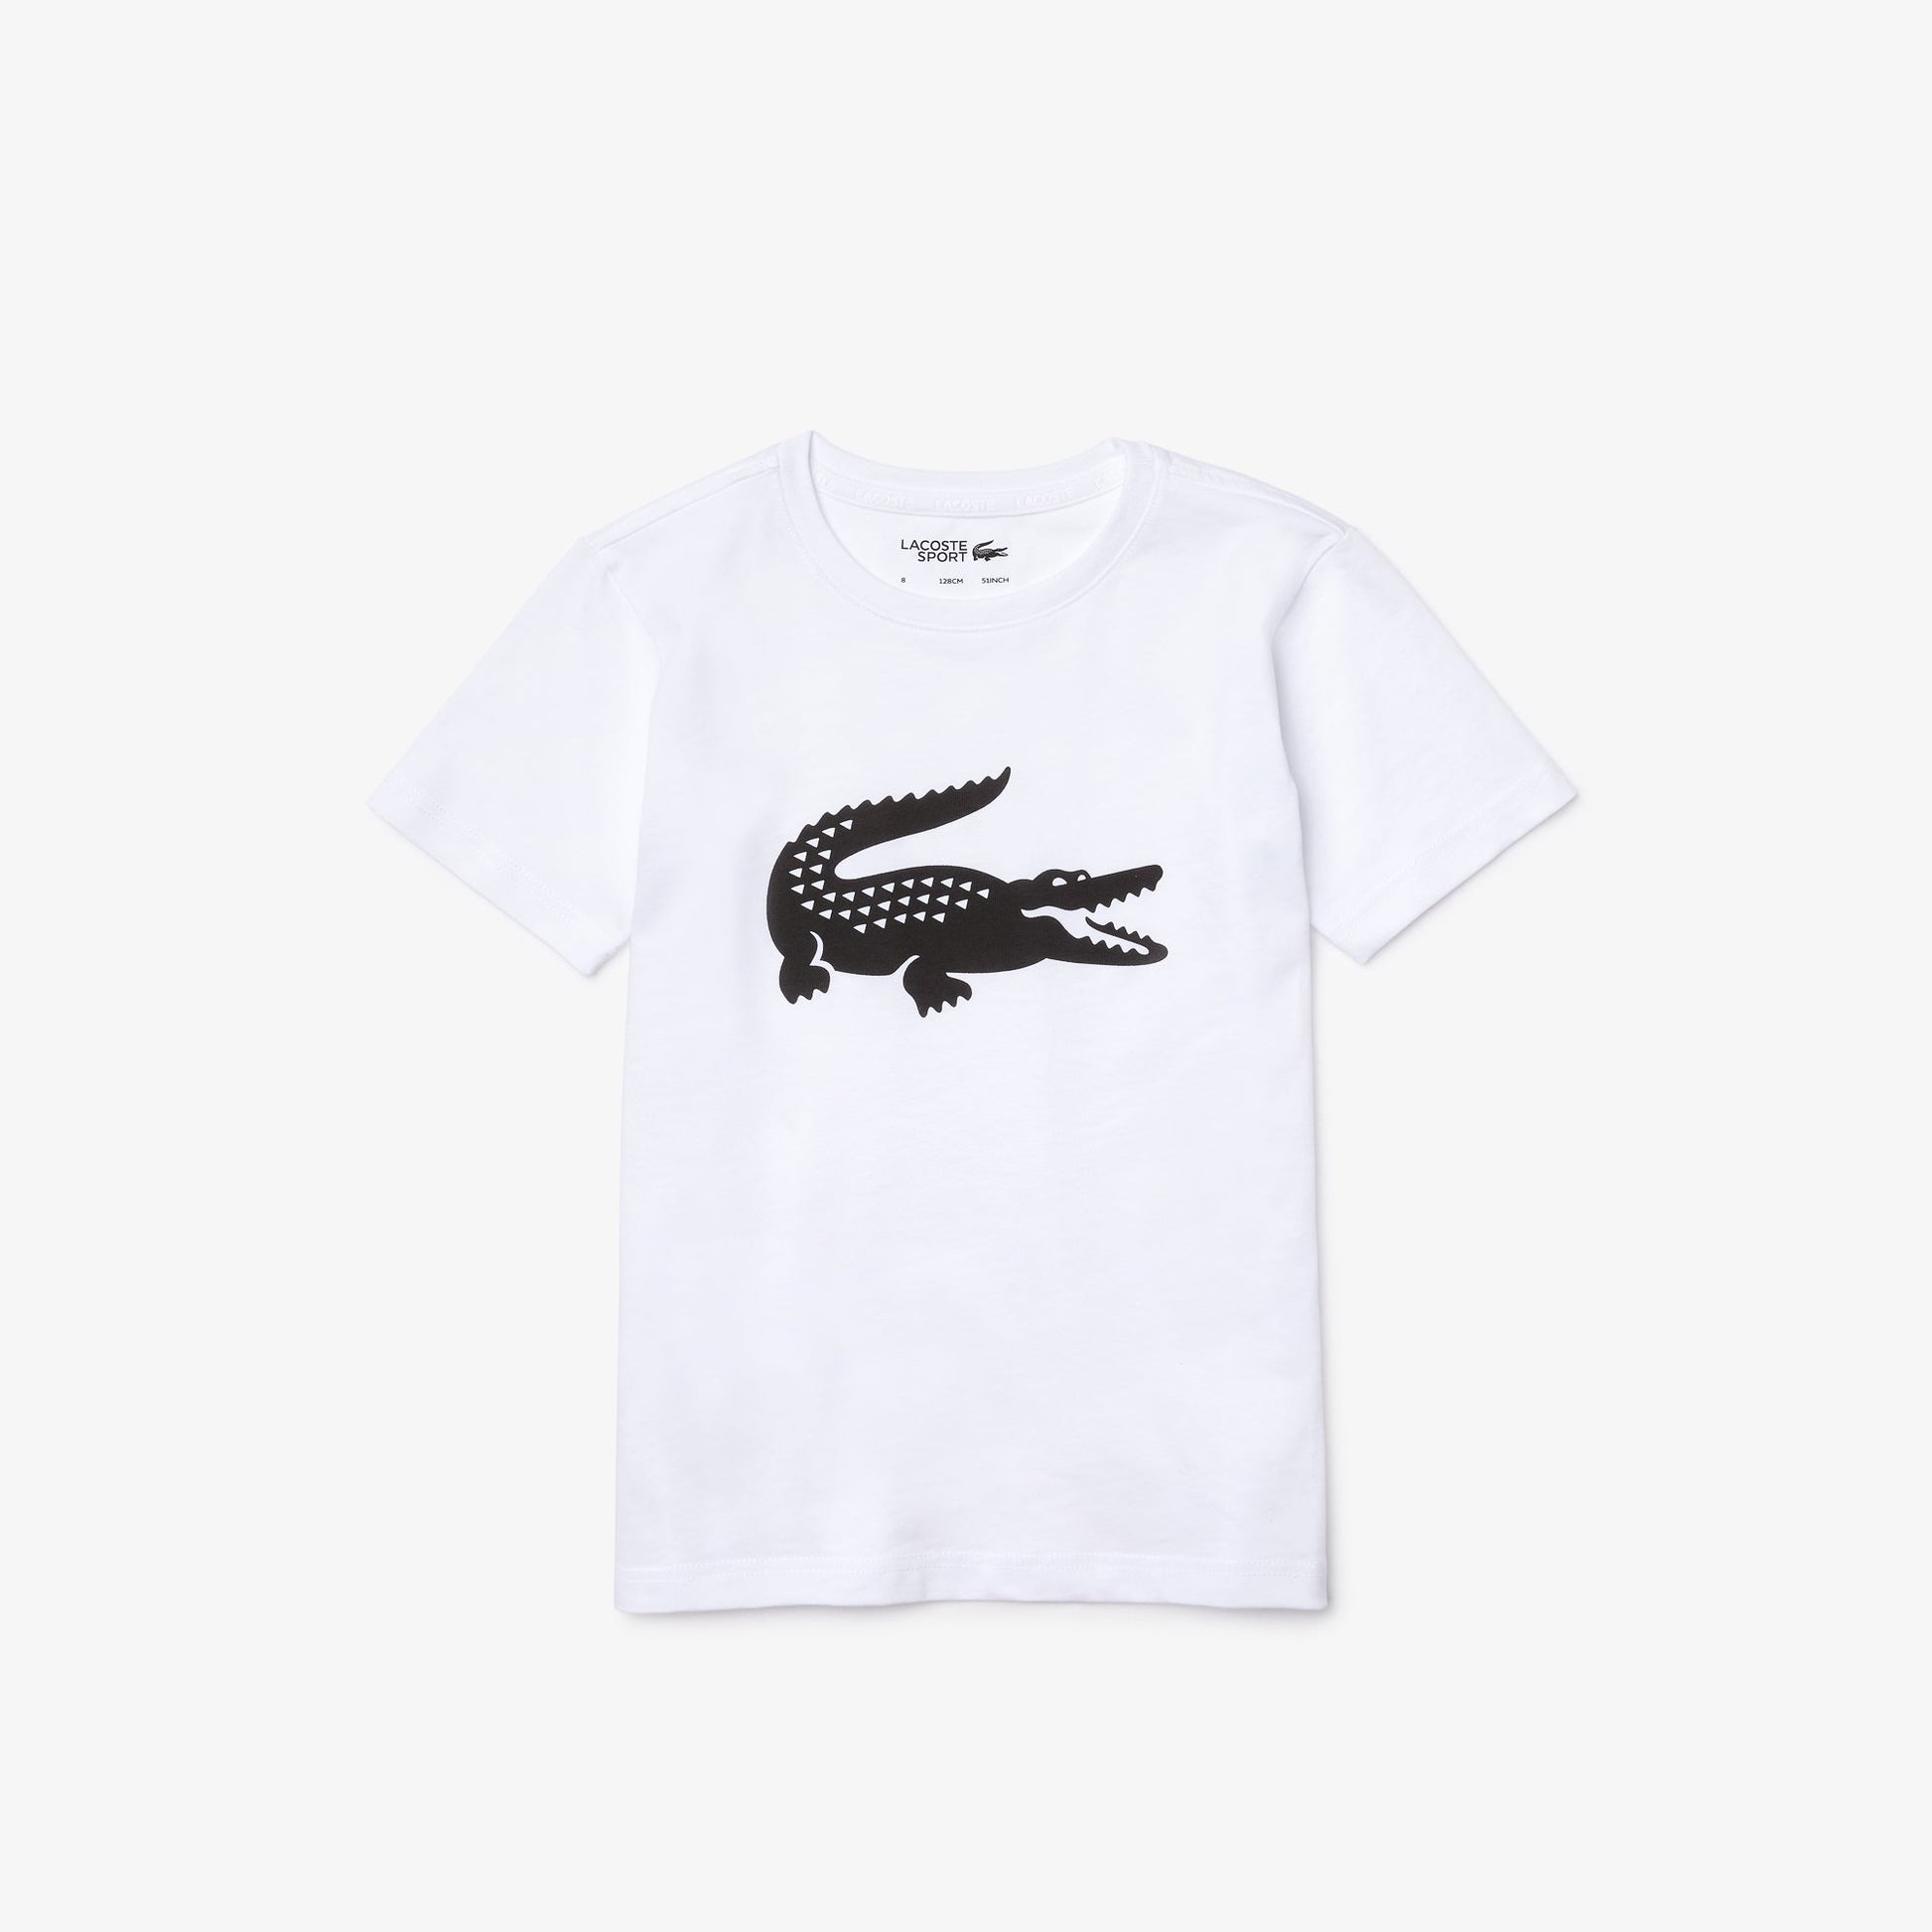 Shop The Latest Collection Of Lacoste Boys' Lacoste Sport Tennis Technical Jersey Oversized Croc T-Shirt  - Tj2910 In Lebanon